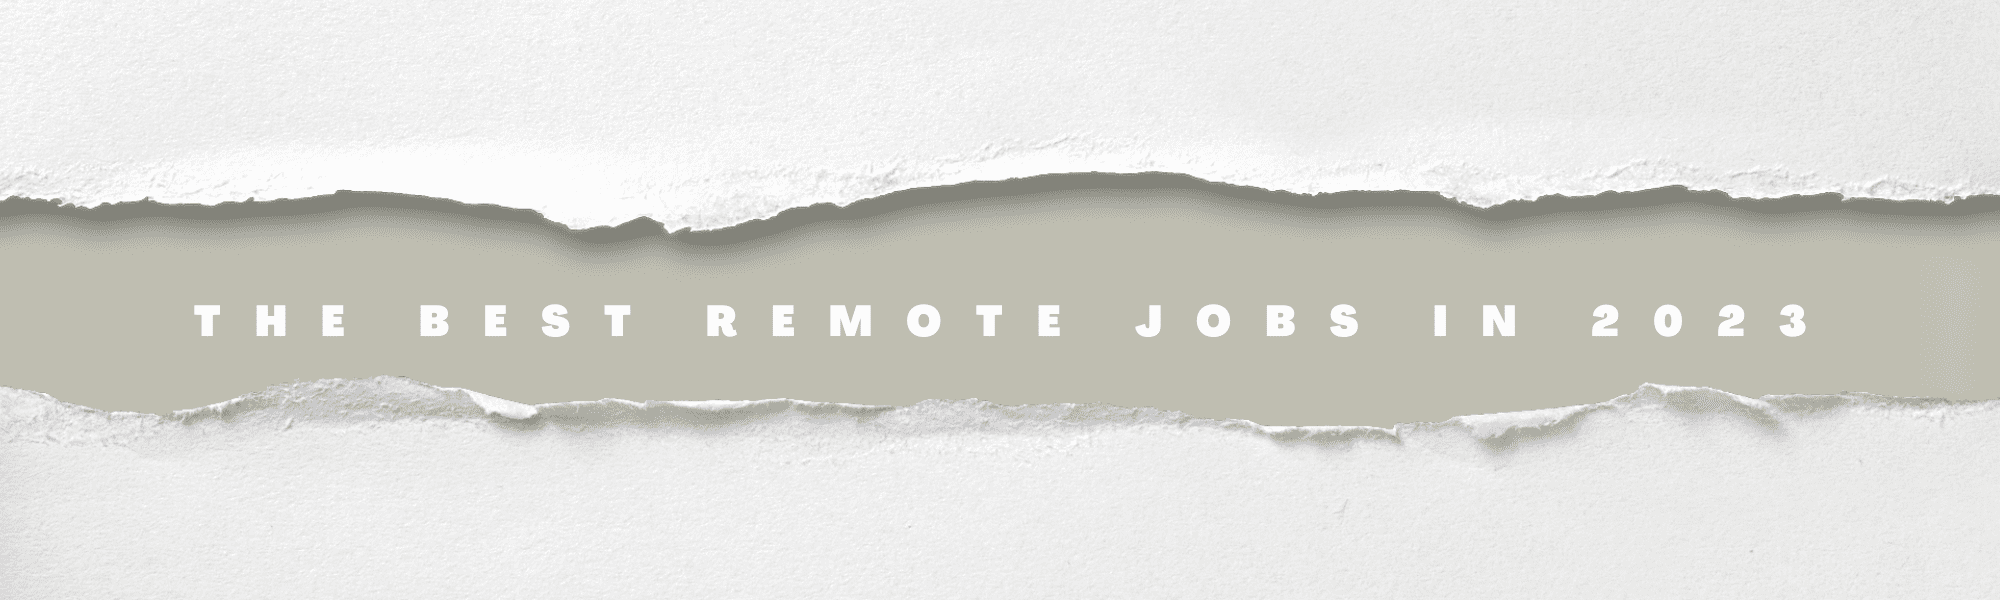 Cover Image for The best remote jobs you can get right away